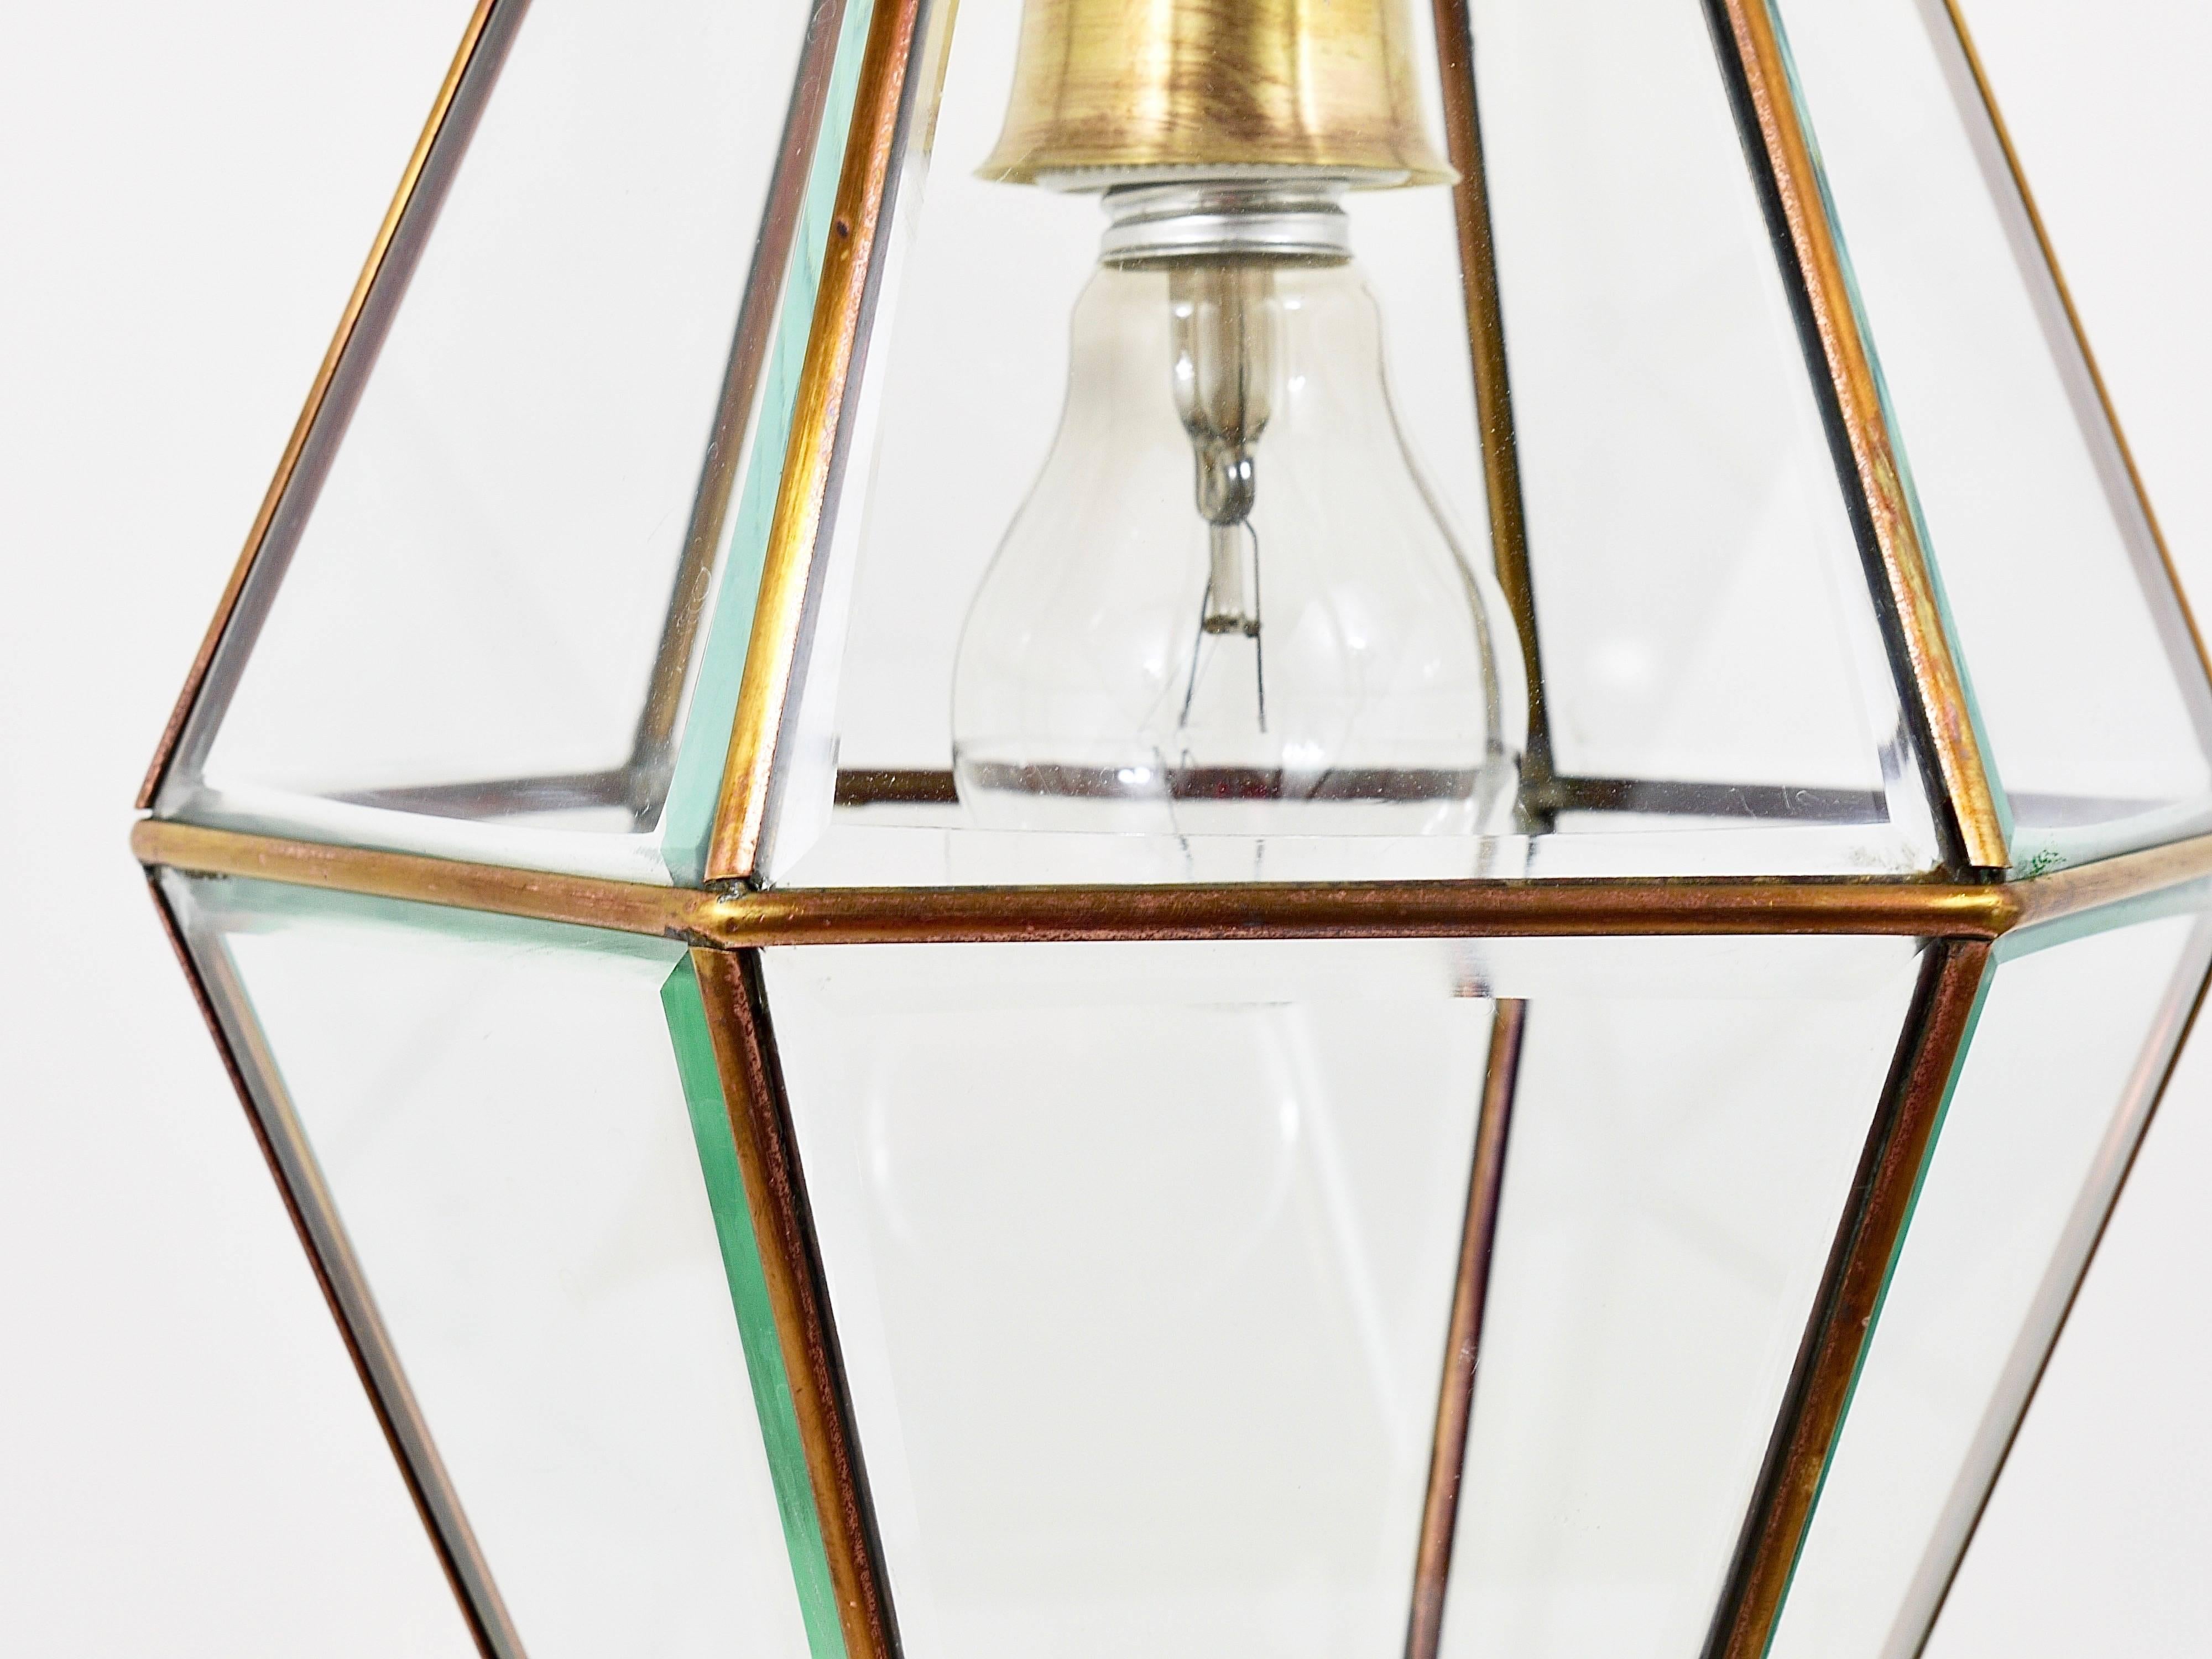 Faceted Art Nouveau Pendant Lamp Lantern in the Manner of Adolf Loos, Knize, 1900s For Sale